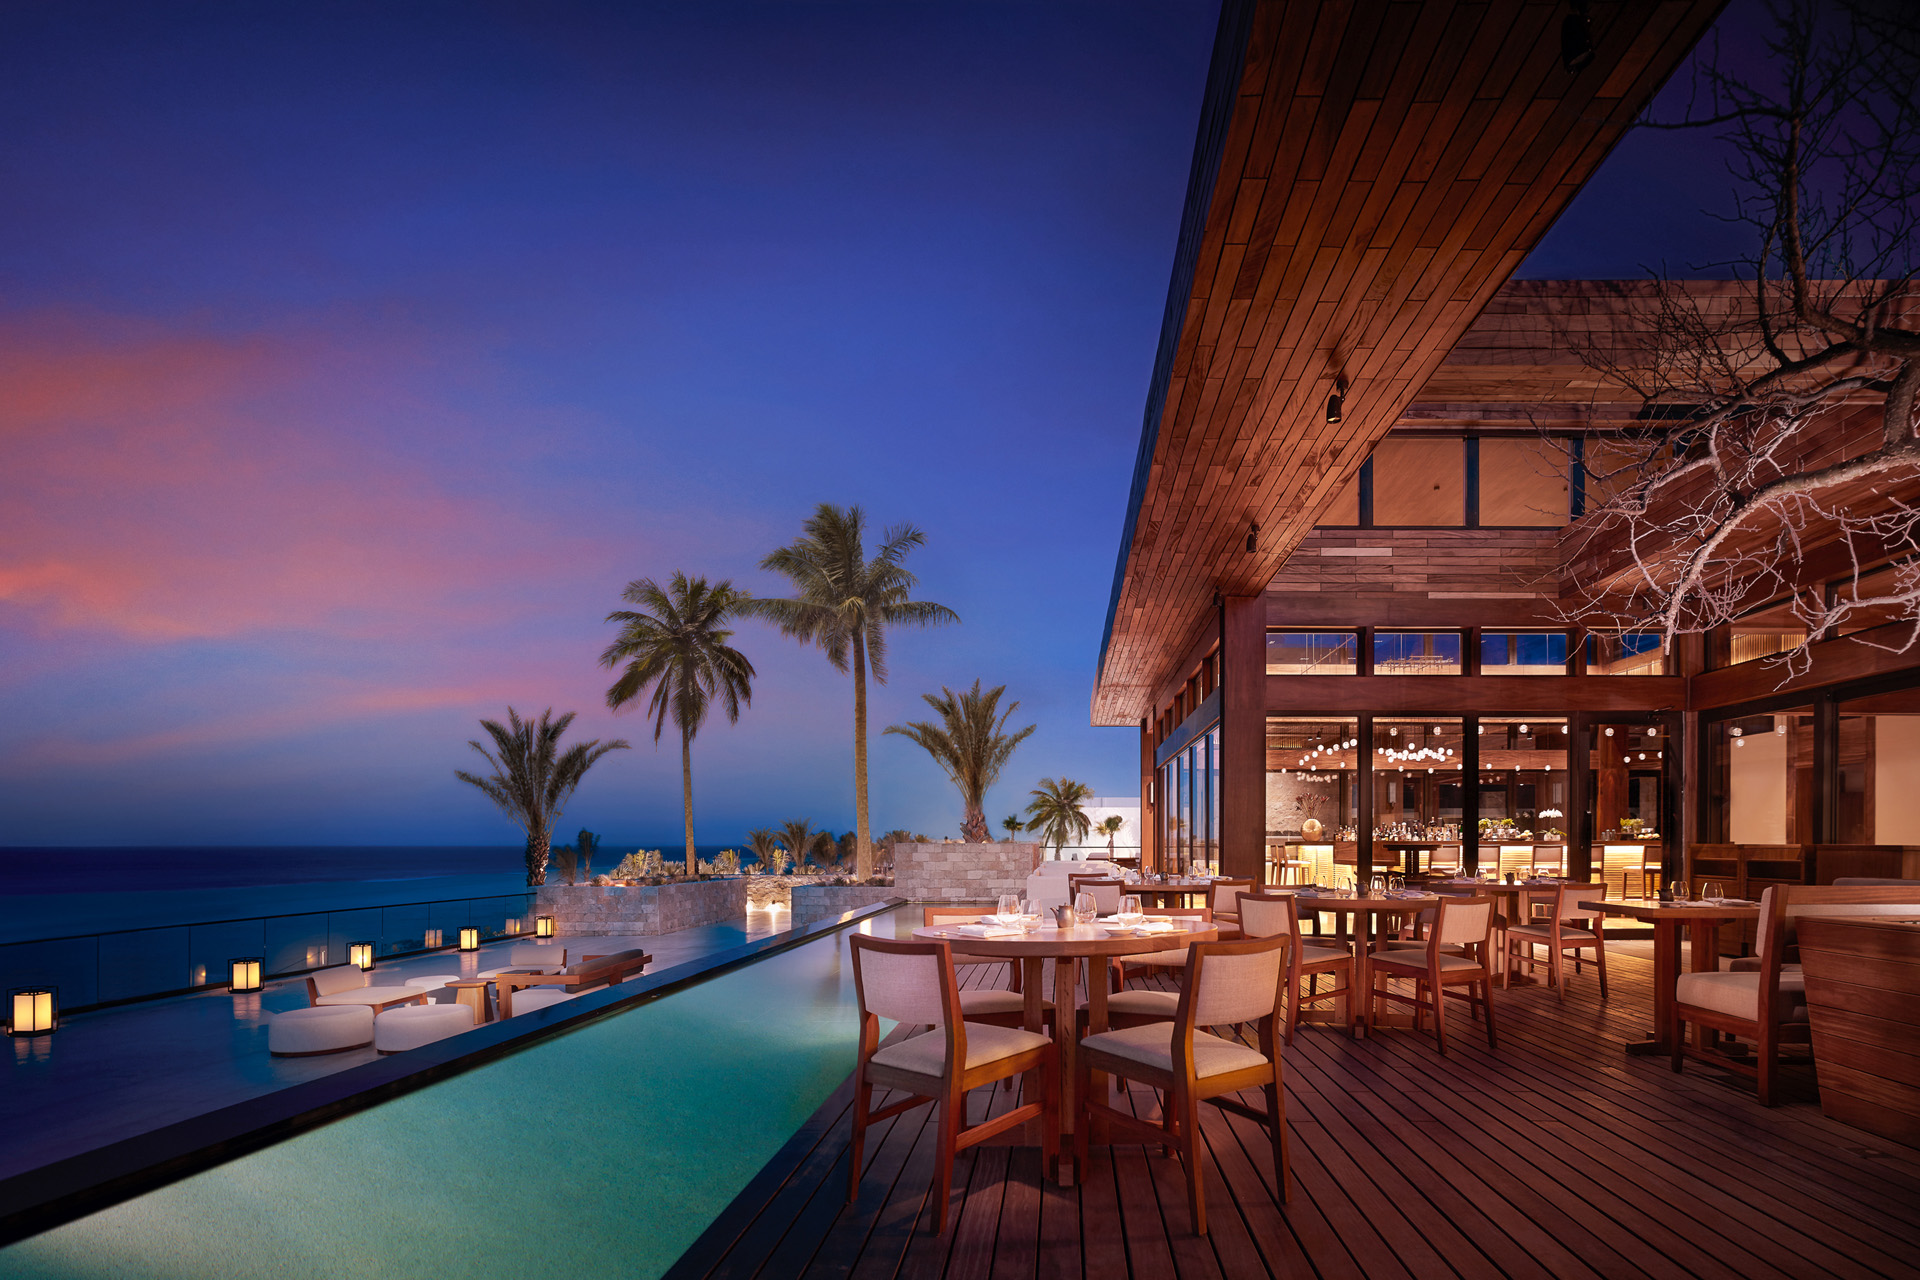 a restaurant terrace with pool overlooking the sea at dusk